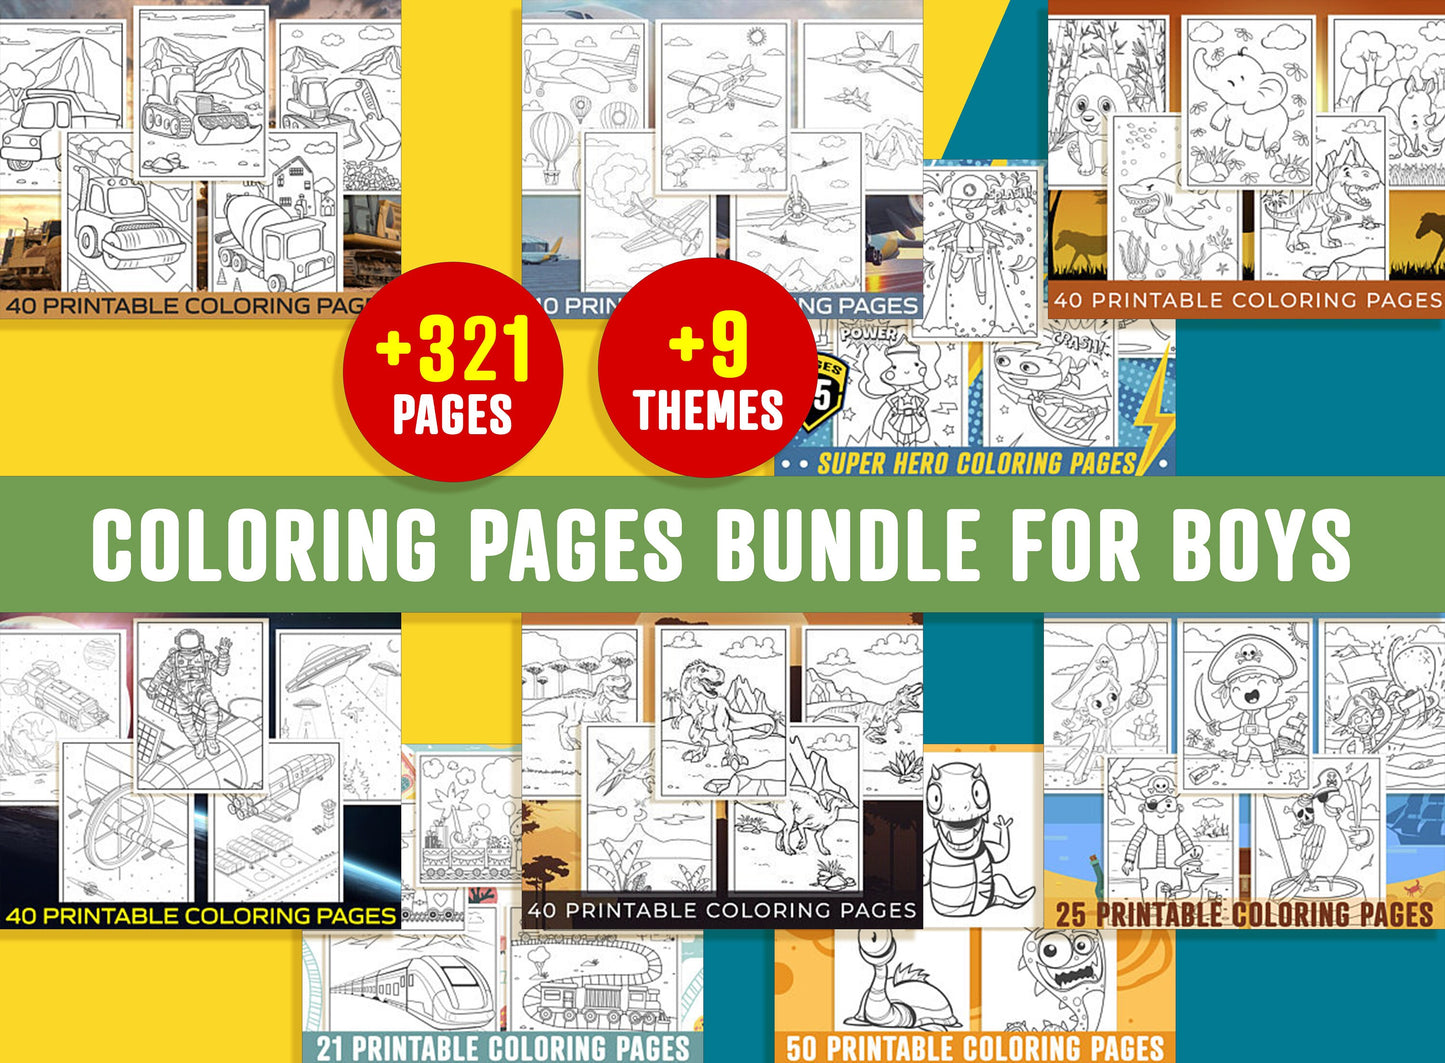 Coloring Pages Bundle For Boys, Over 9 Themes, 321 Printable Coloring Pages for Kids, Boys,  Save Big - Instant Download.